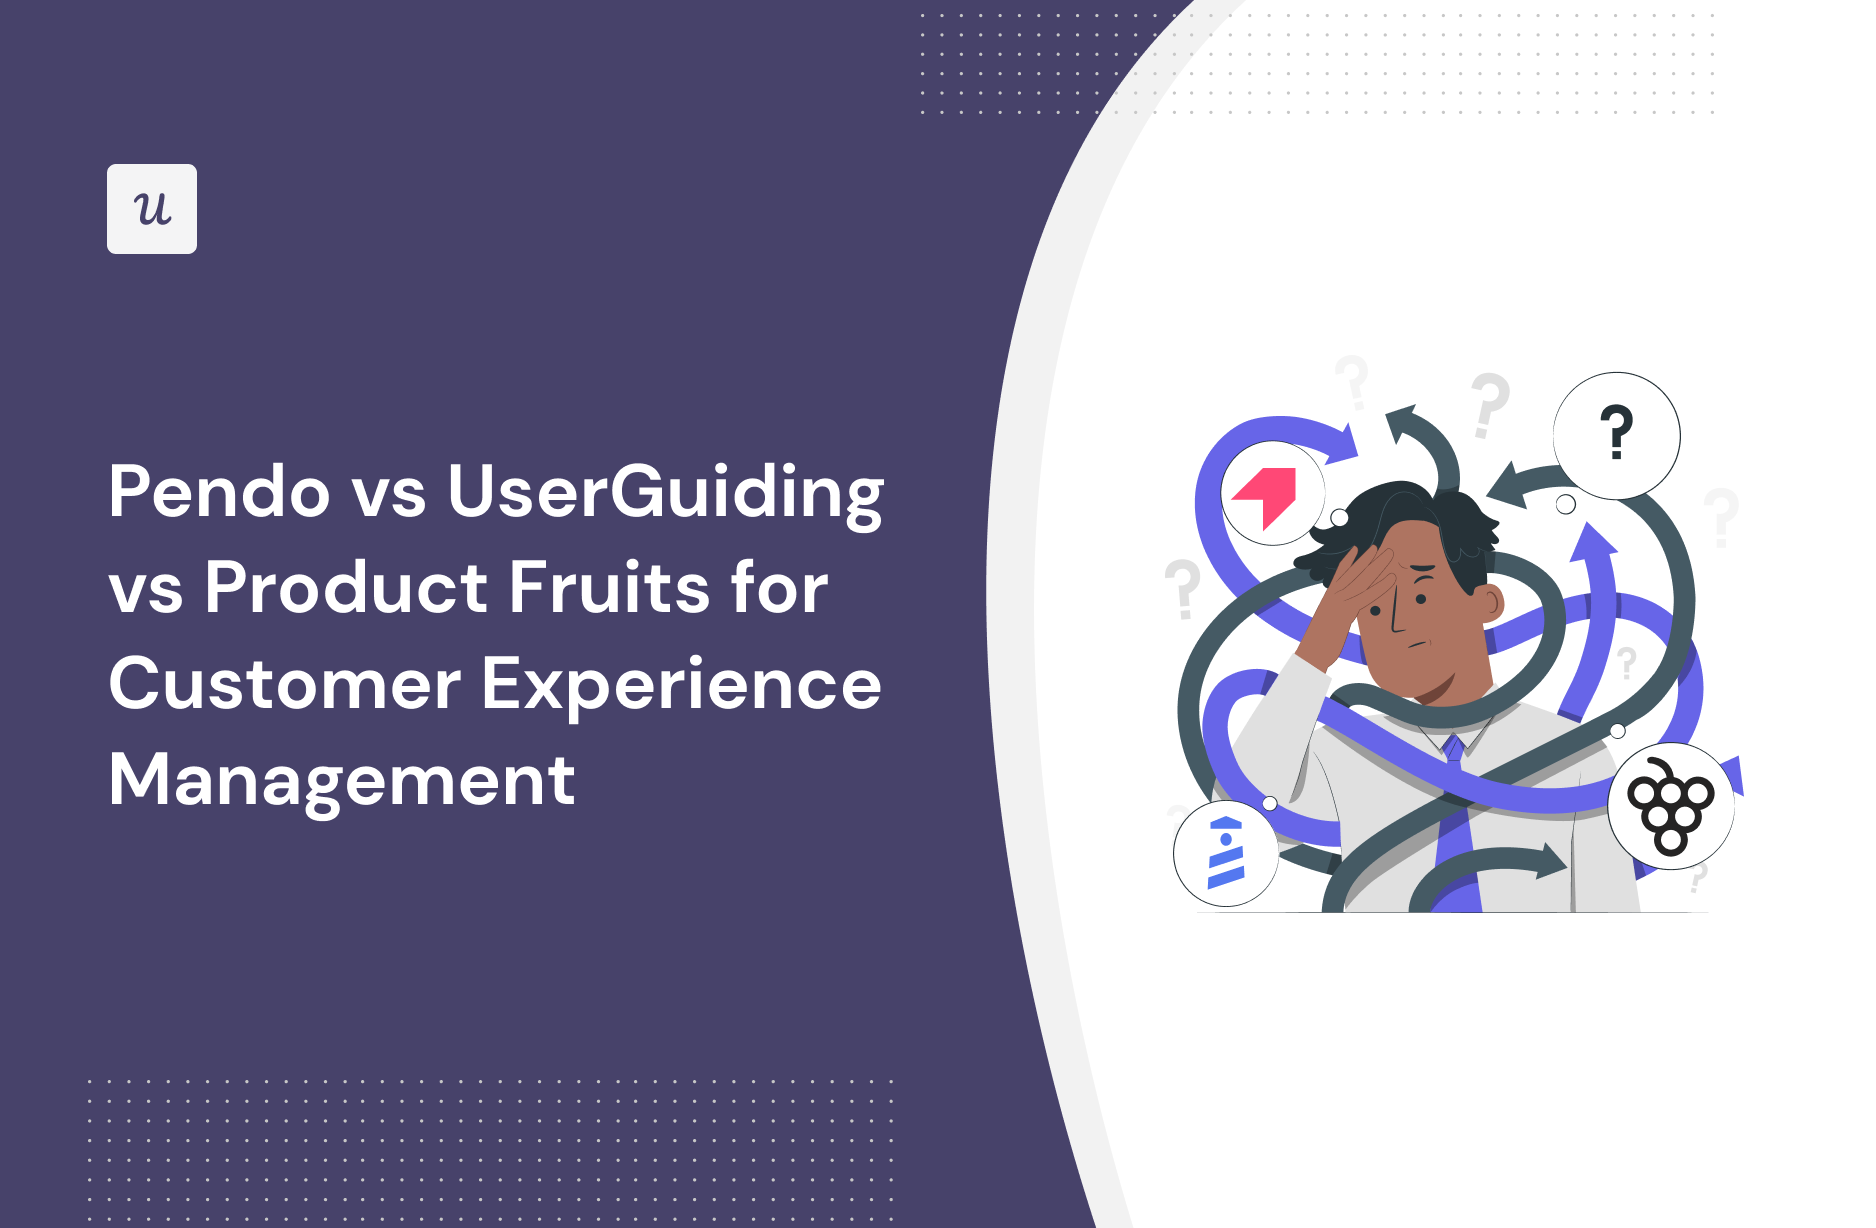 Pendo vs UserGuiding vs Product Fruits for Customer Experience Management